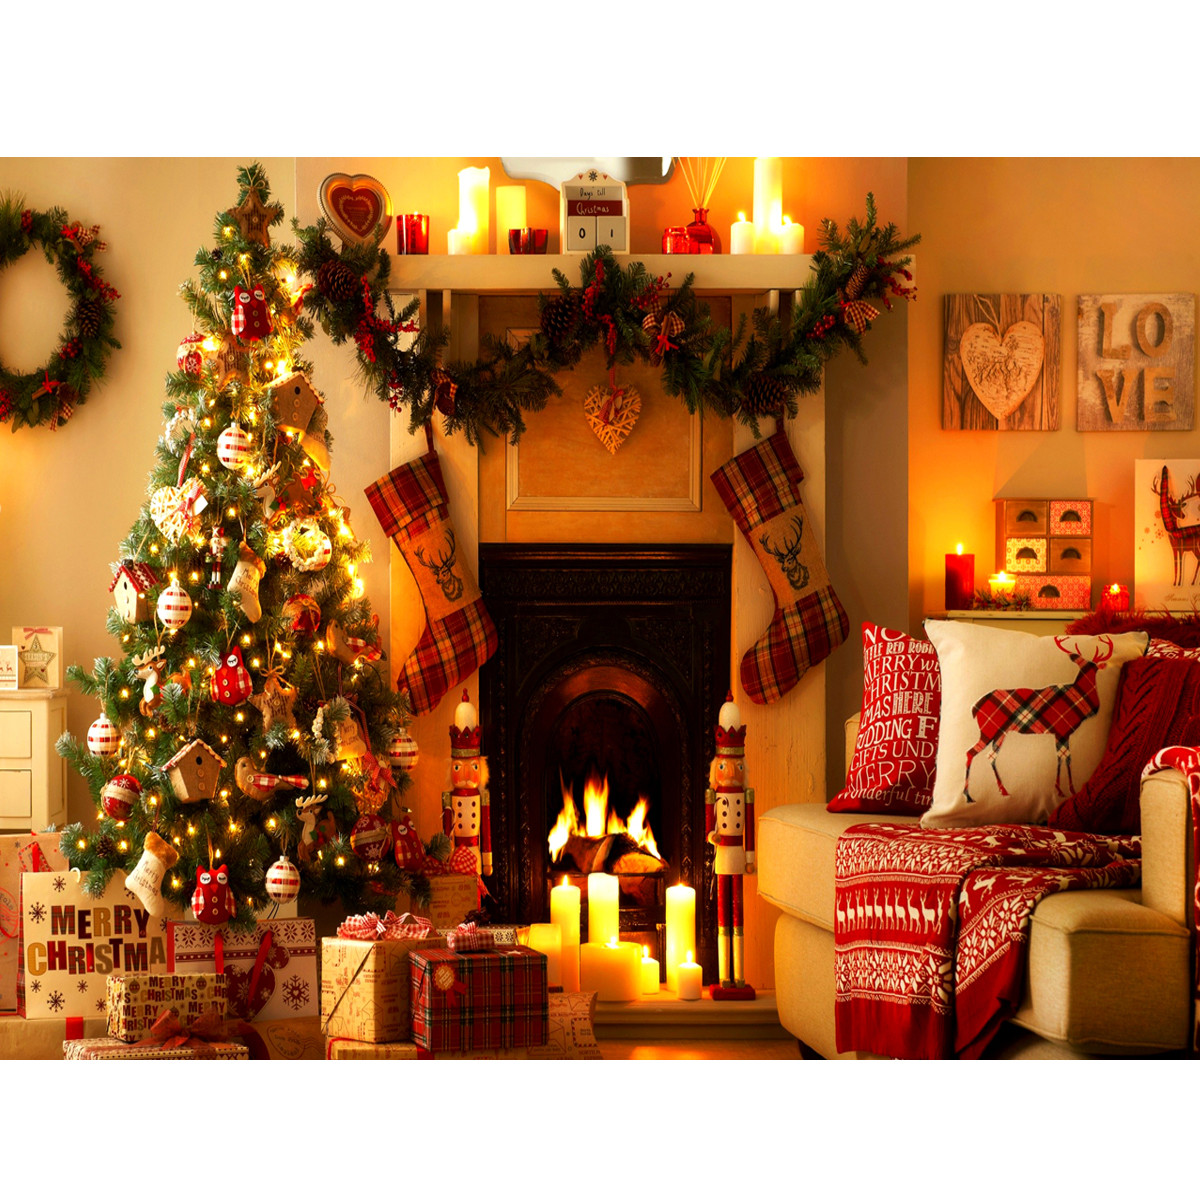 Christmas Tree With Fireplace
 5x7ft Vinyl Warm Light Christmas Tree Fireplace Stocking